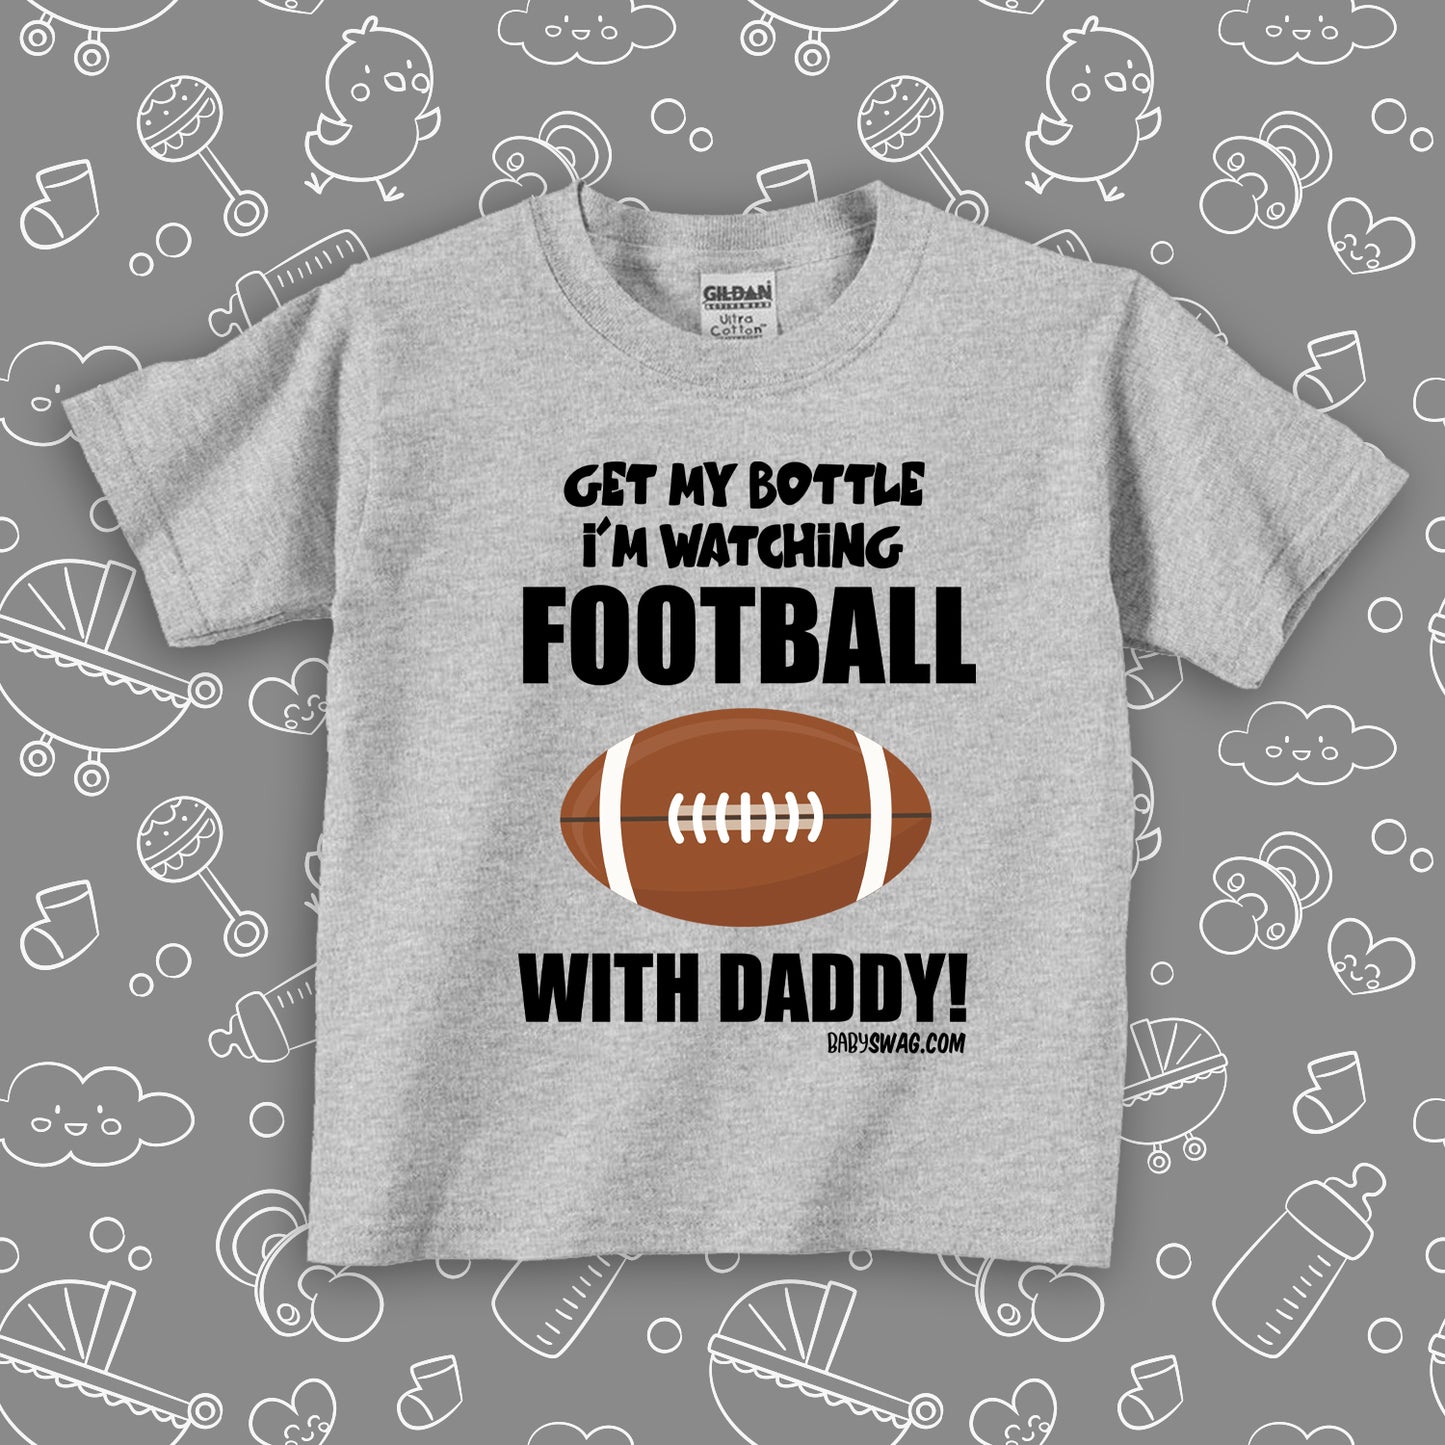 The "Get My Bottle I'm Watching Football With Daddy" funny toddler boy shirt in grey. 